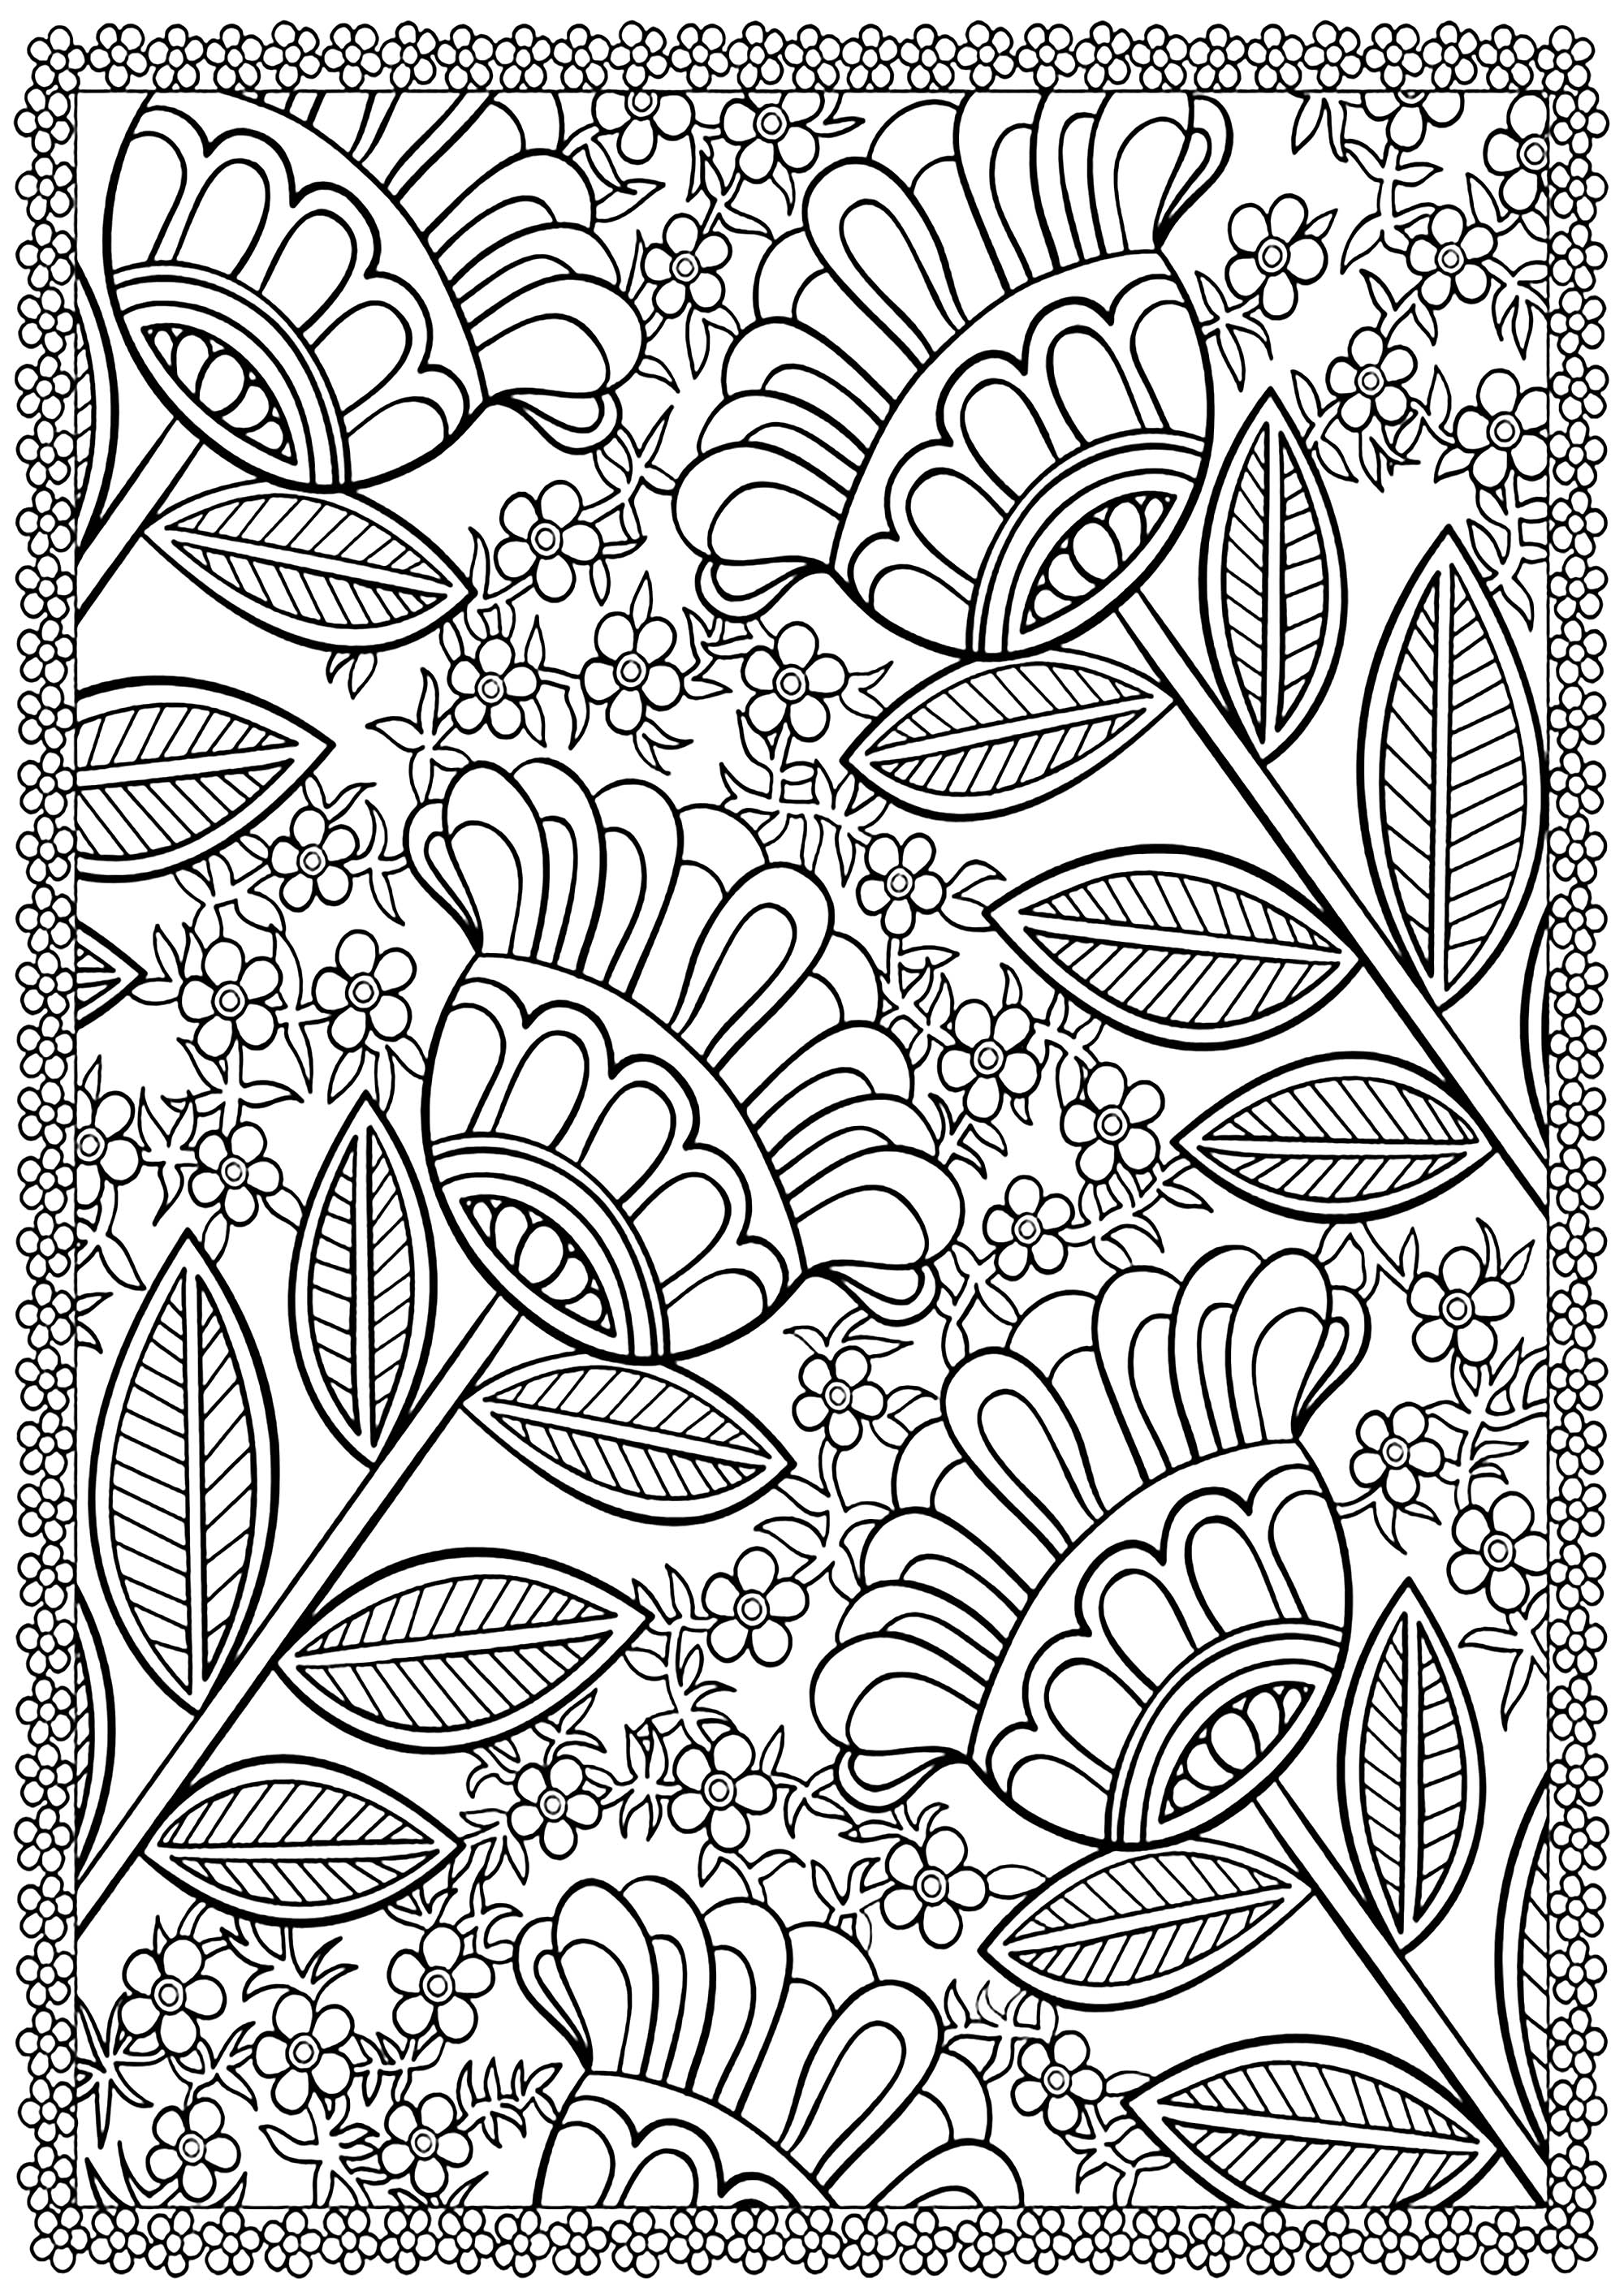 93 Coloring Pages Flower Borders Images & Pictures In HD